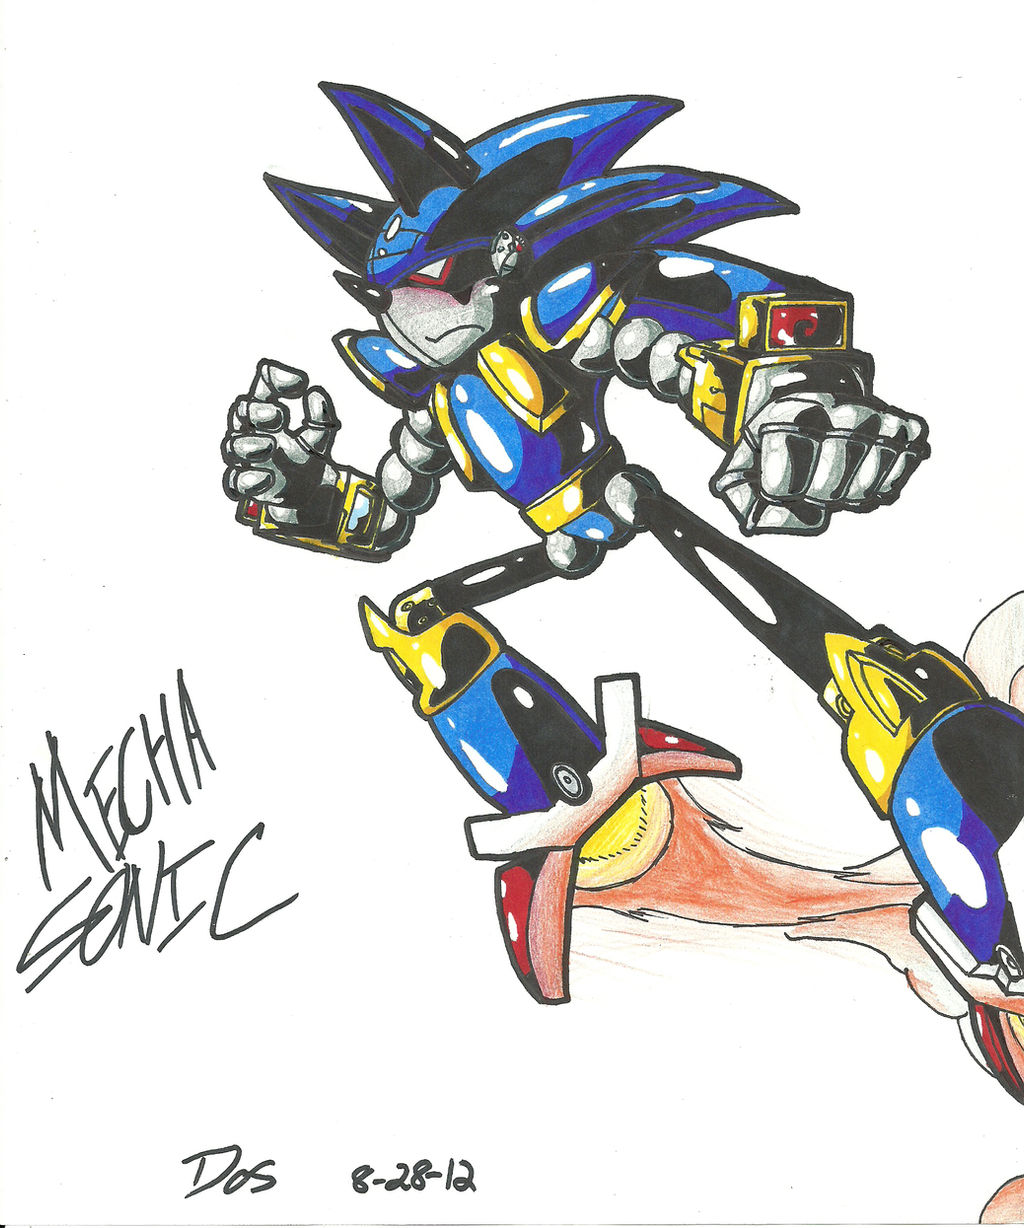 Mecha Sonic by TheWax on DeviantArt